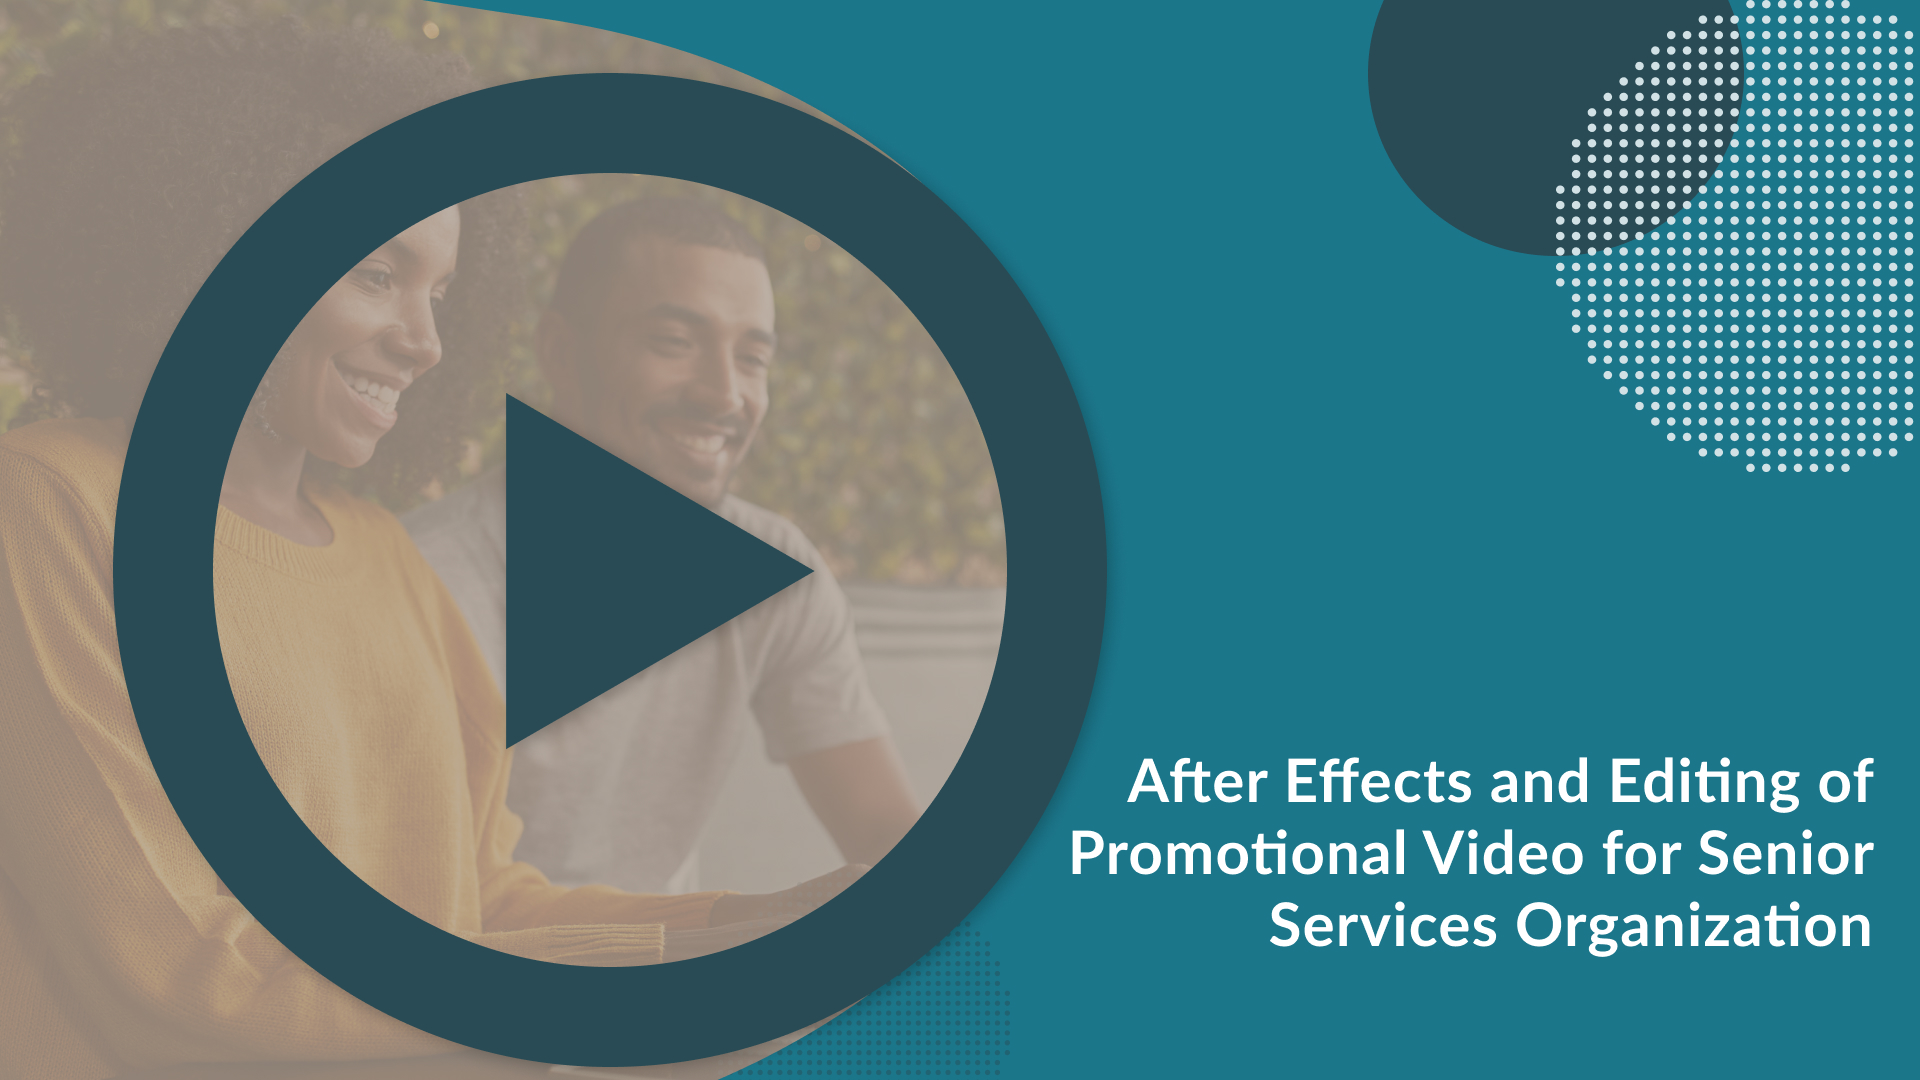 Image Overlay. Text reads, "After Effects and Editing in Promotional Video for Senior Services Organization "